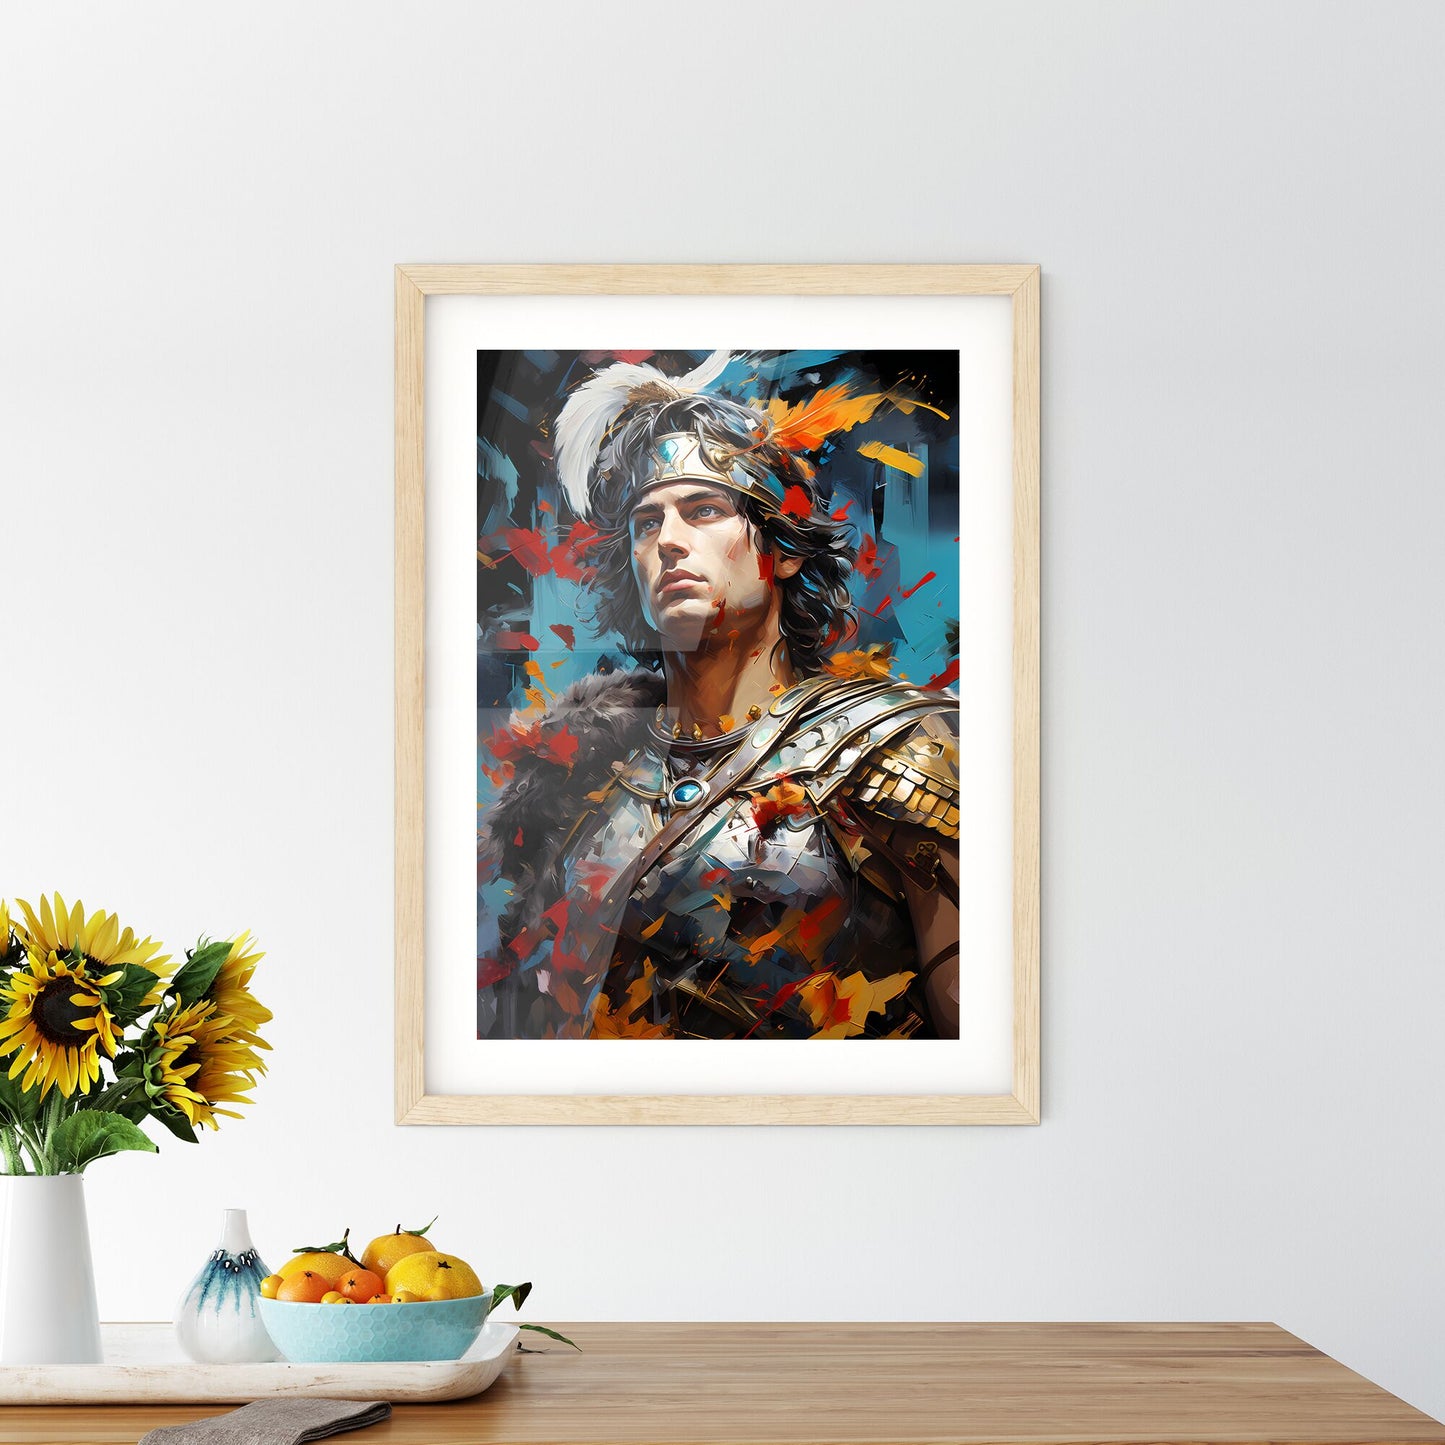 Alexander The Great King Of Macedonia - A Man In Armor With Feathers And Feathers On His Head Default Title